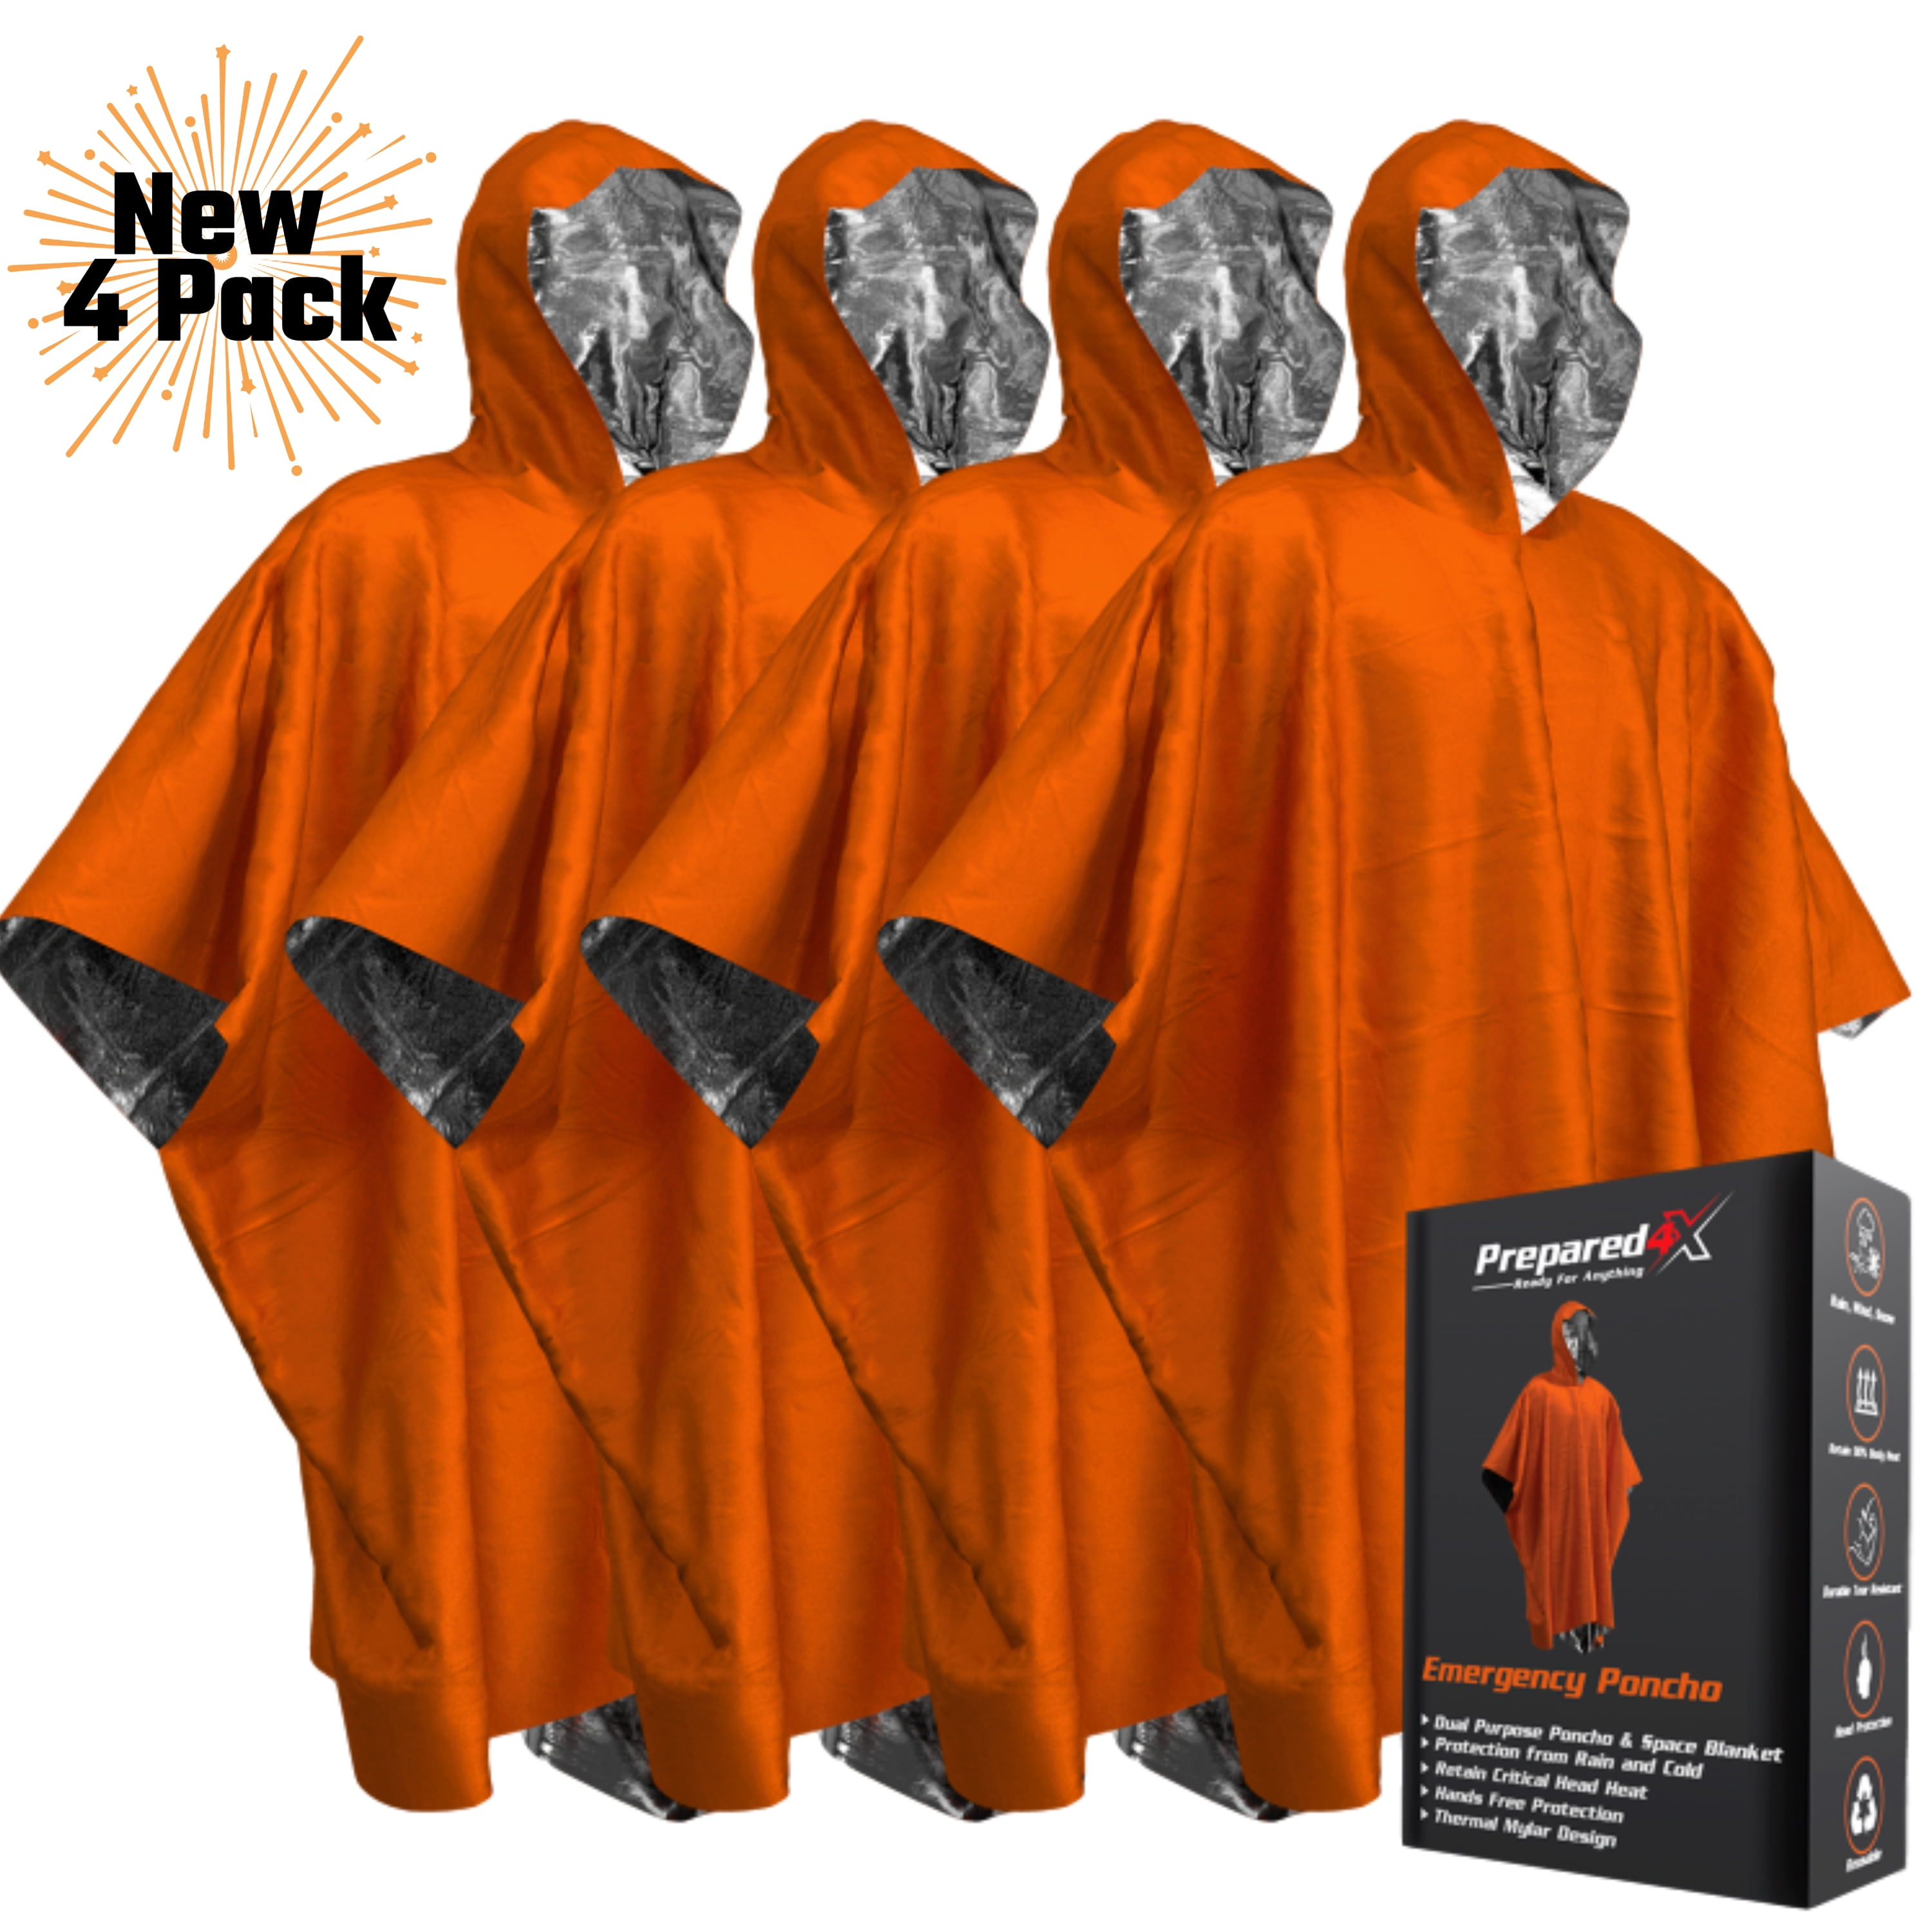 EVERLIT Emergency Survival Rain Poncho Reusable Mylar Thermal Blanket Poncho All Weather Proof Outdoor Camping Gear 4-Pack 